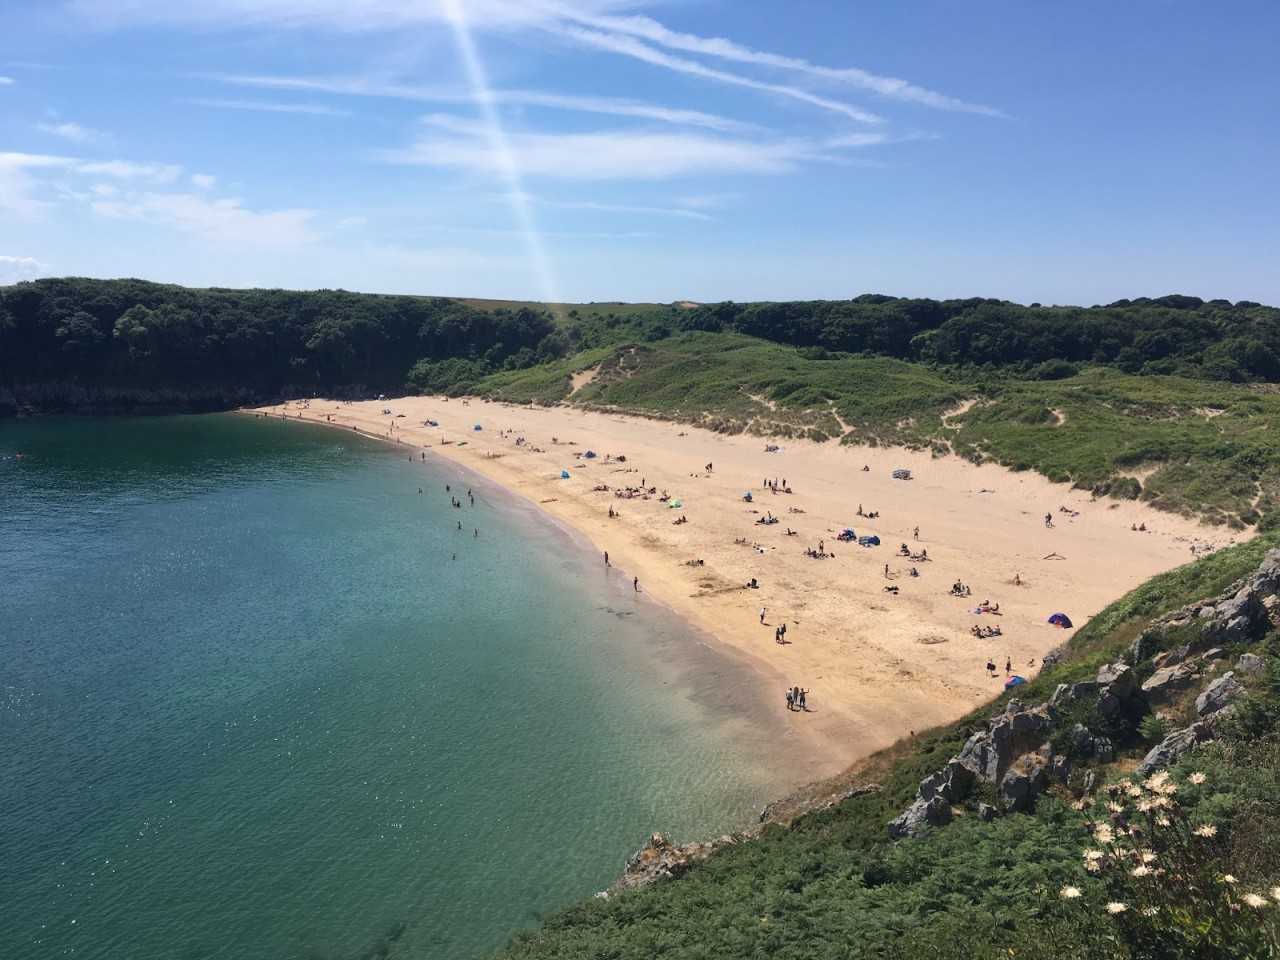 Barafundle Bay often makes it onto lists of the world’s best beaches